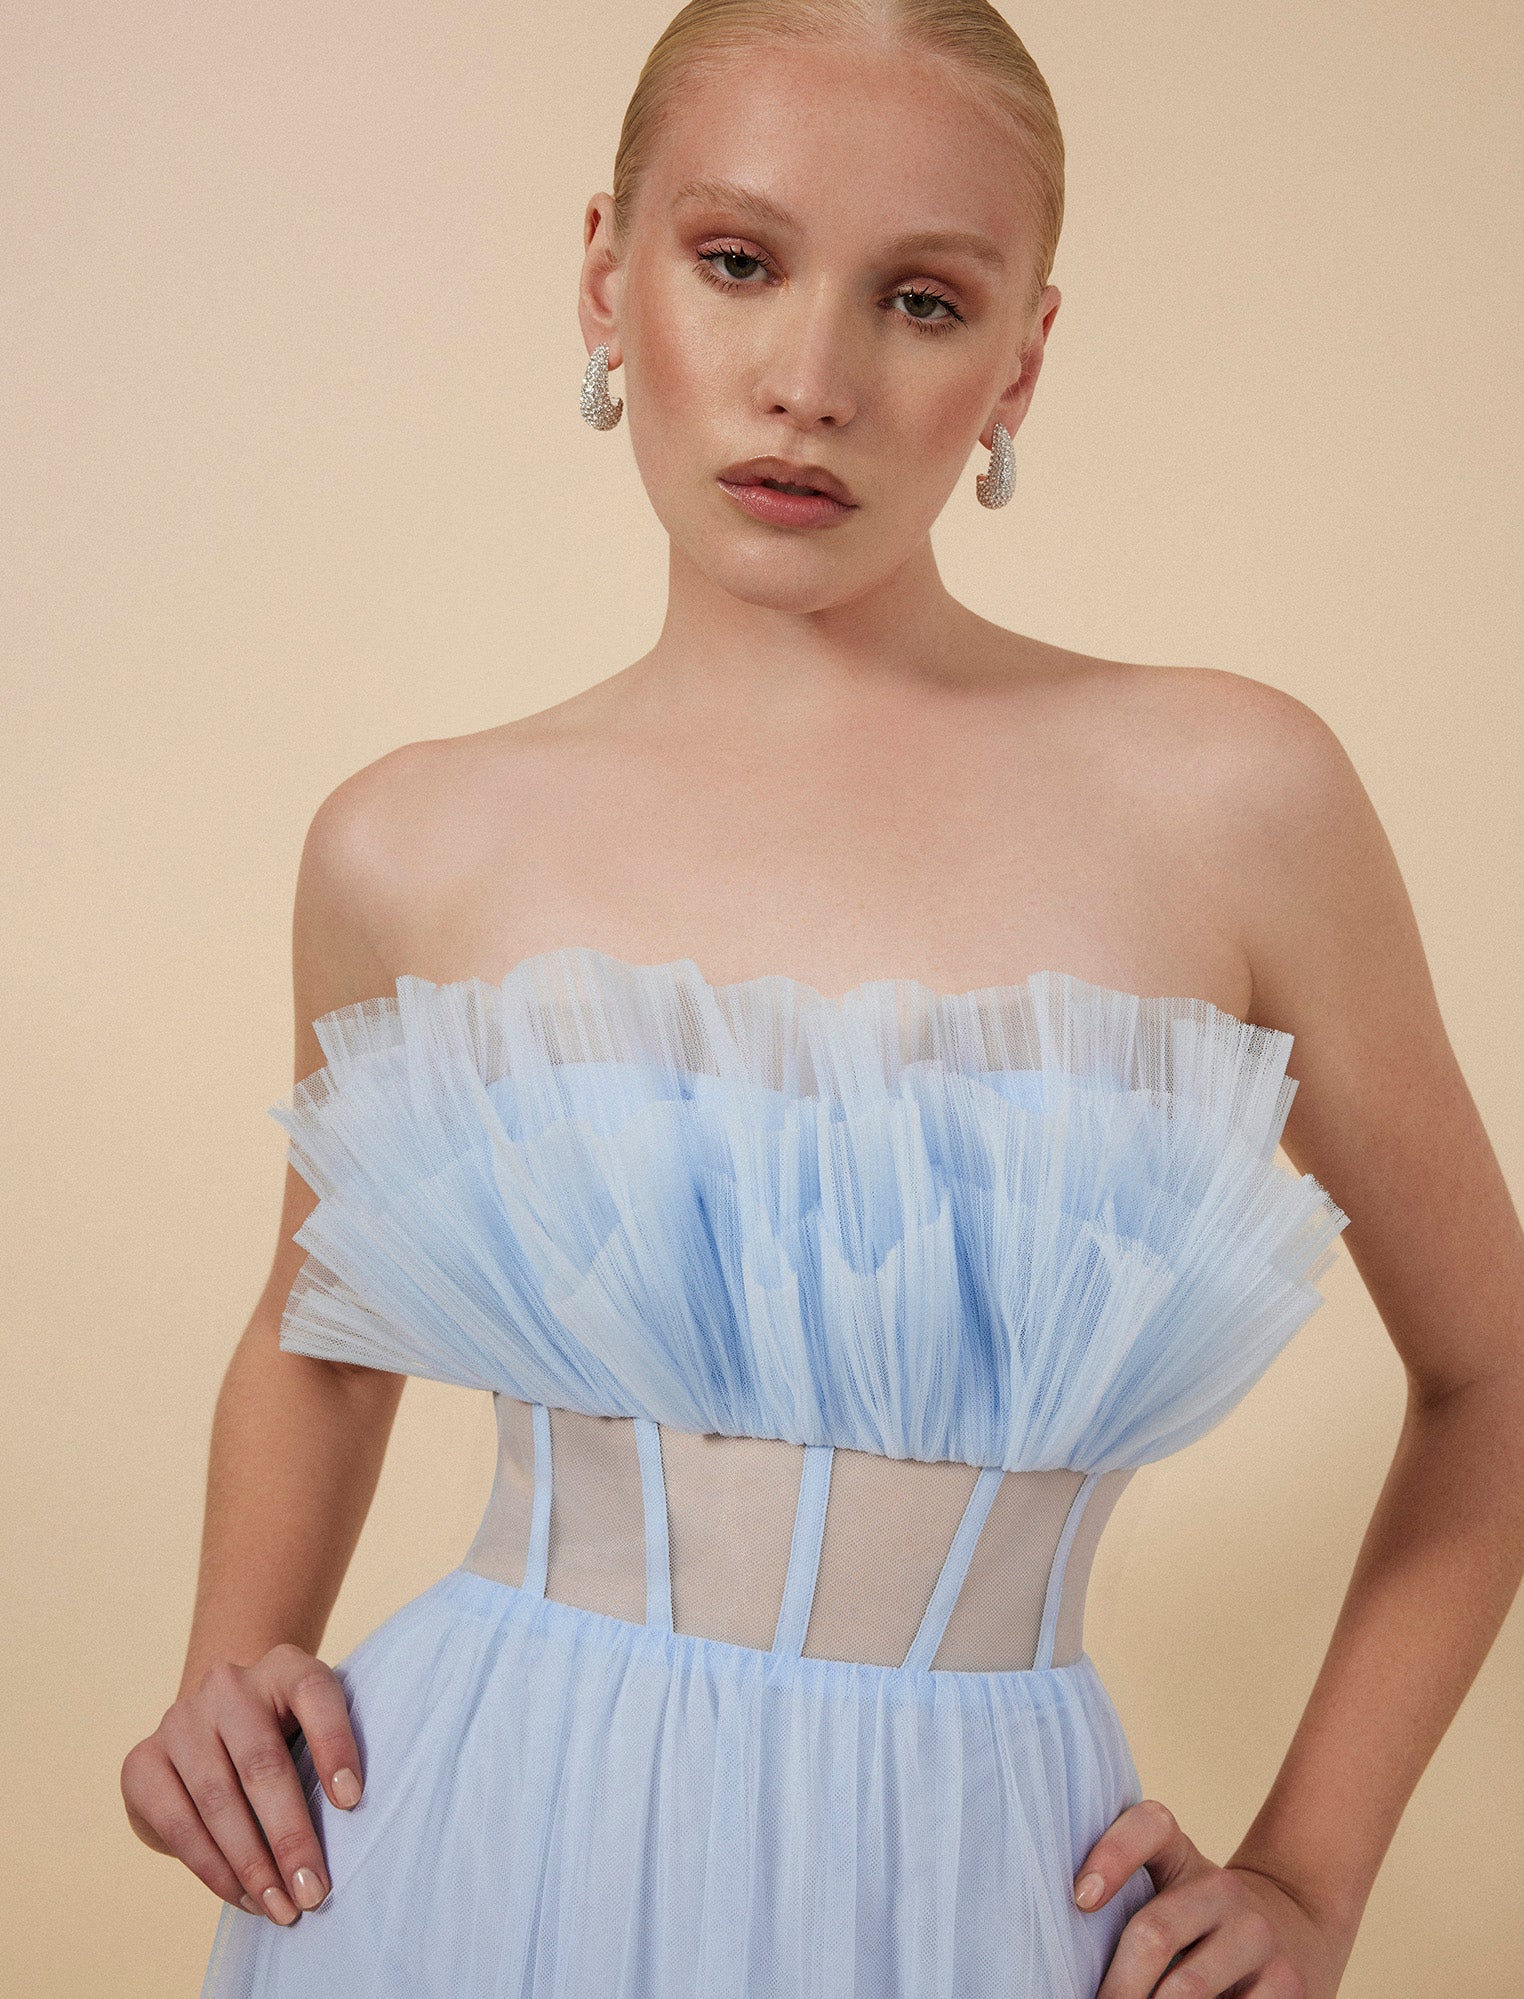 Honey Couture LUCIA Baby Blue Sheer Bustier Corset Tulle Formal